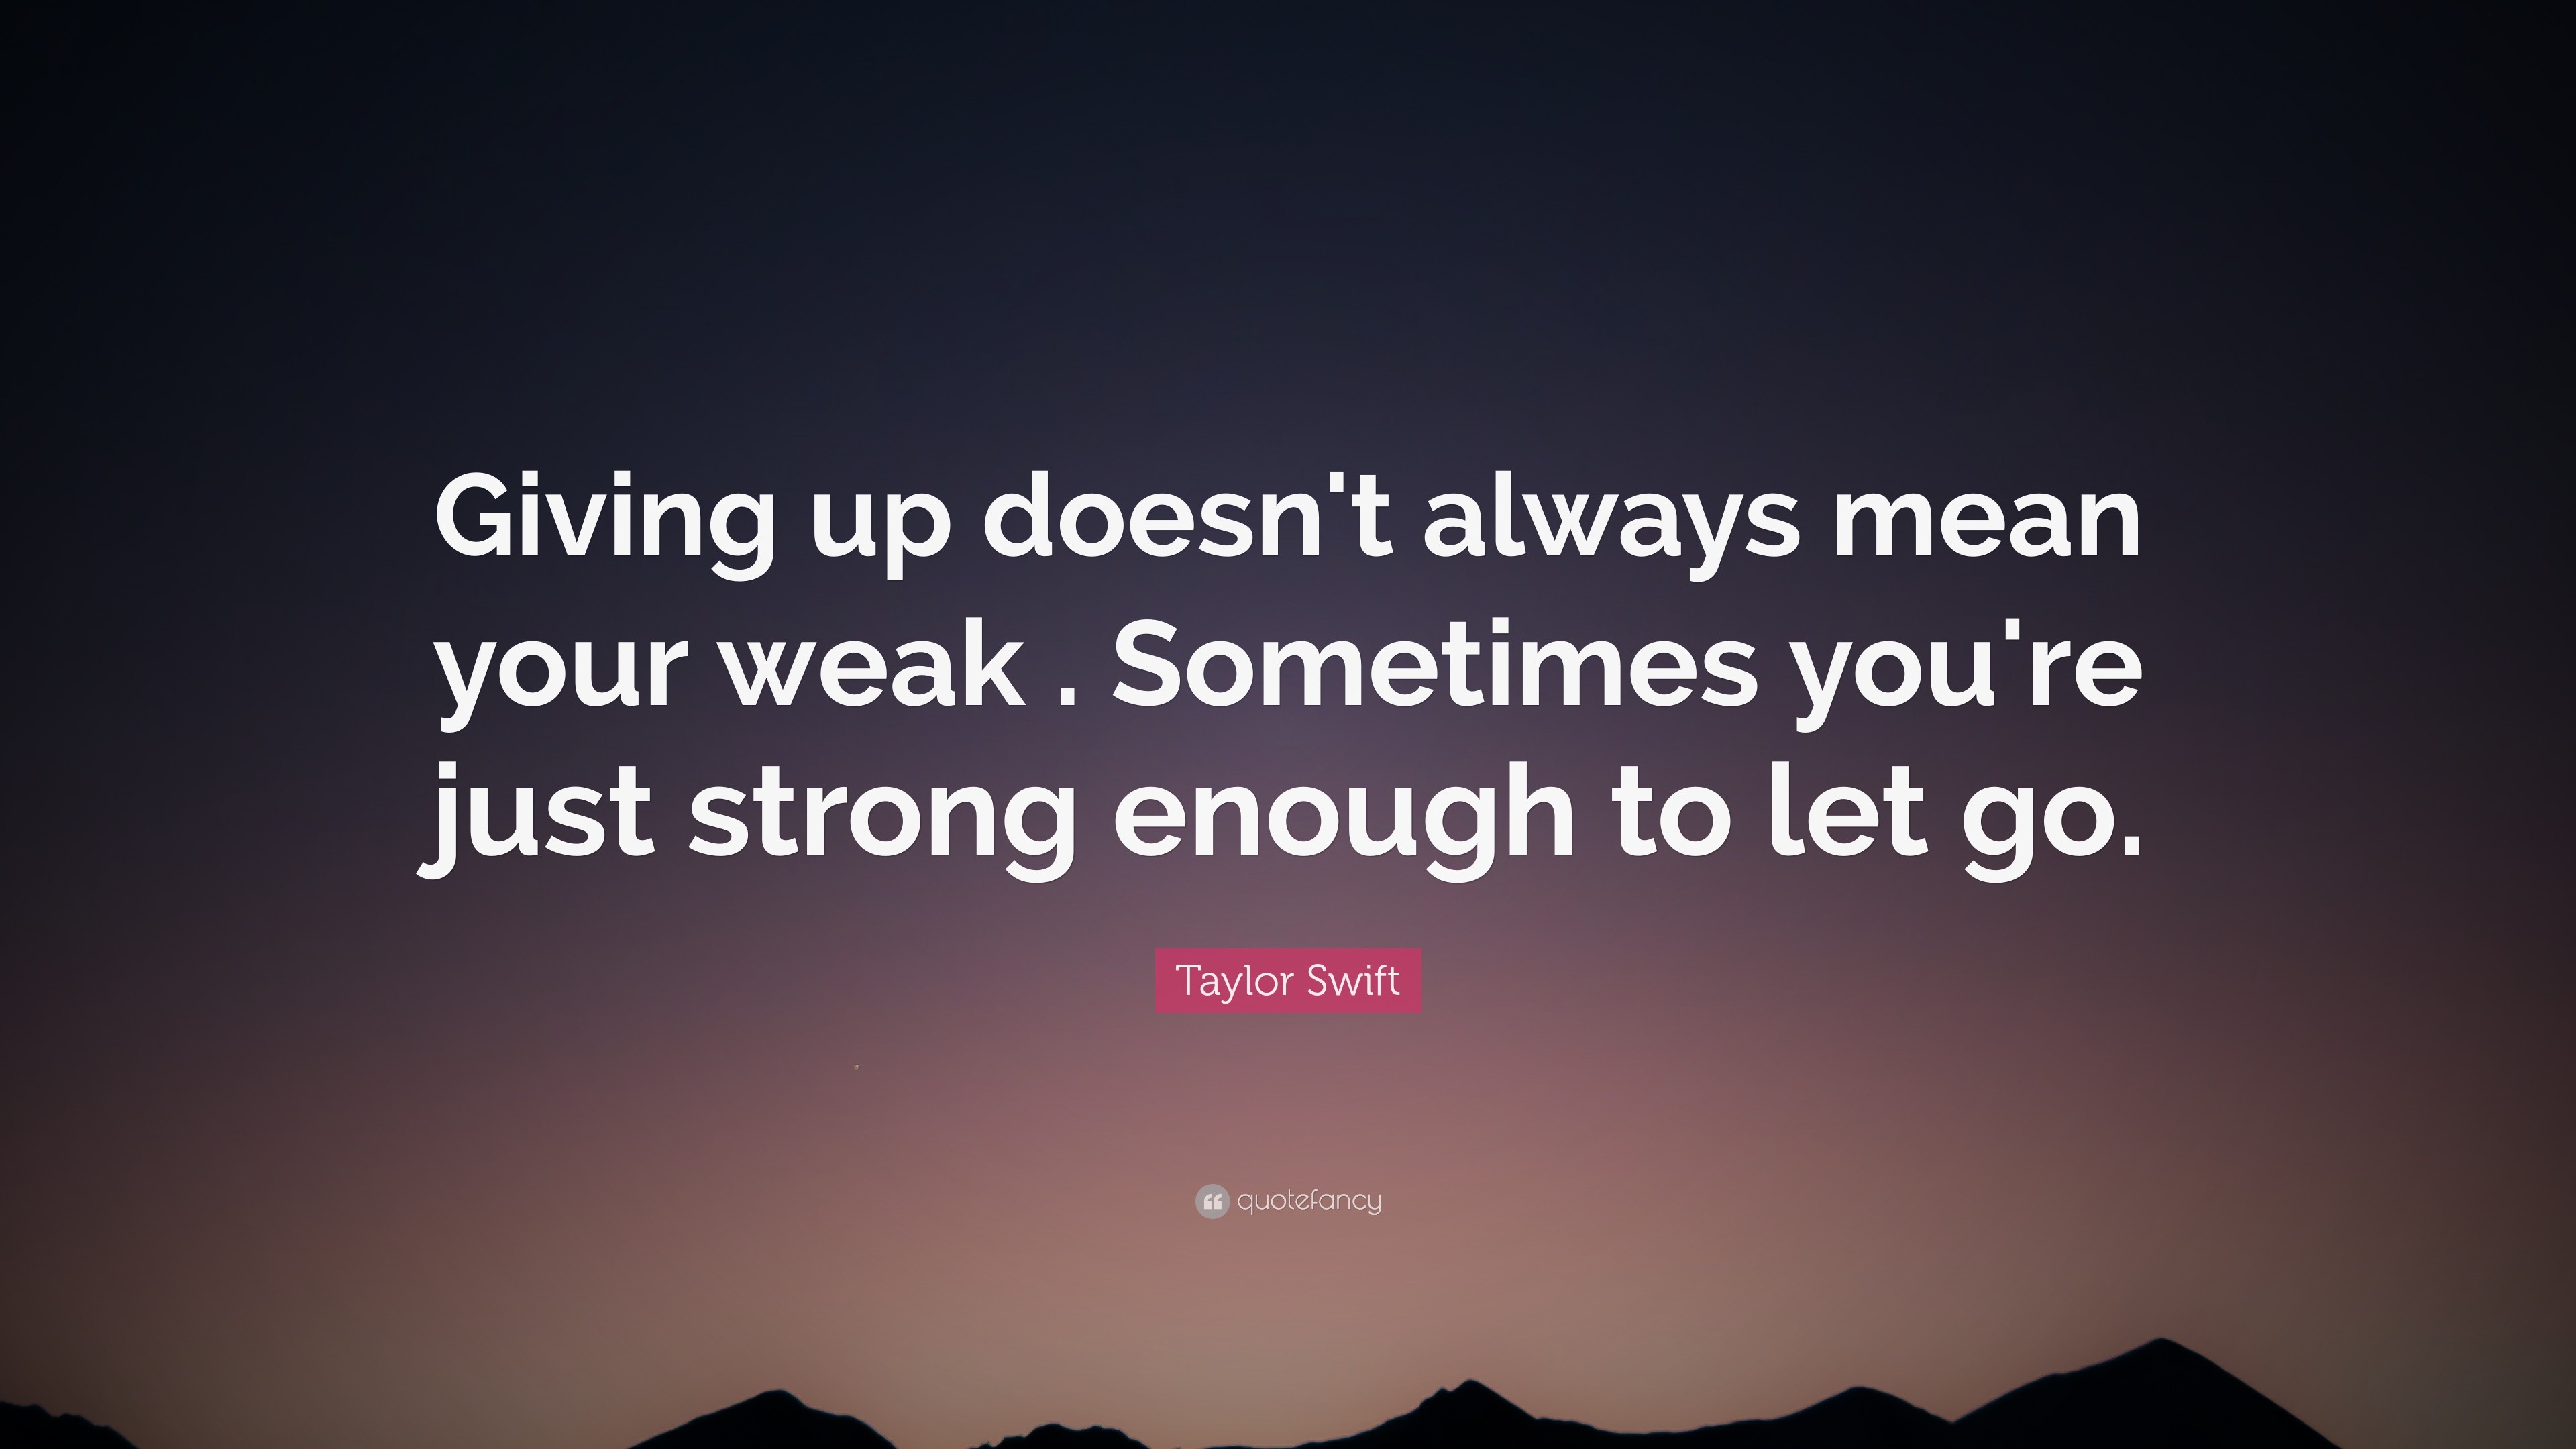 Taylor Swift Quote: “Giving up doesn't always mean your weak ...